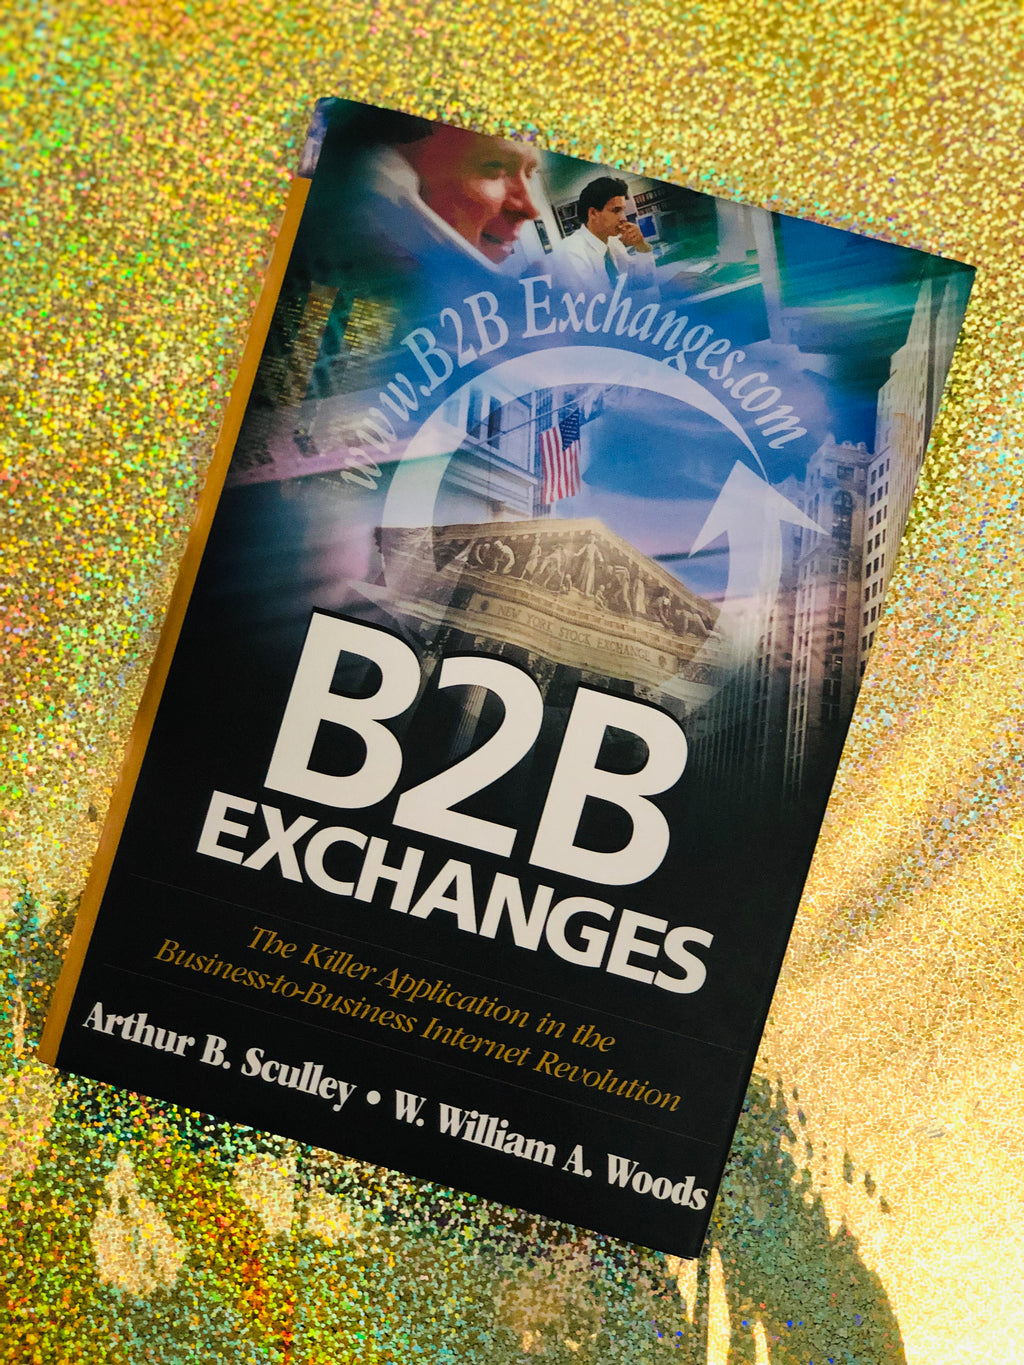 B2B Exchanges- By Arthur B. Sculley & W. William A. Woods